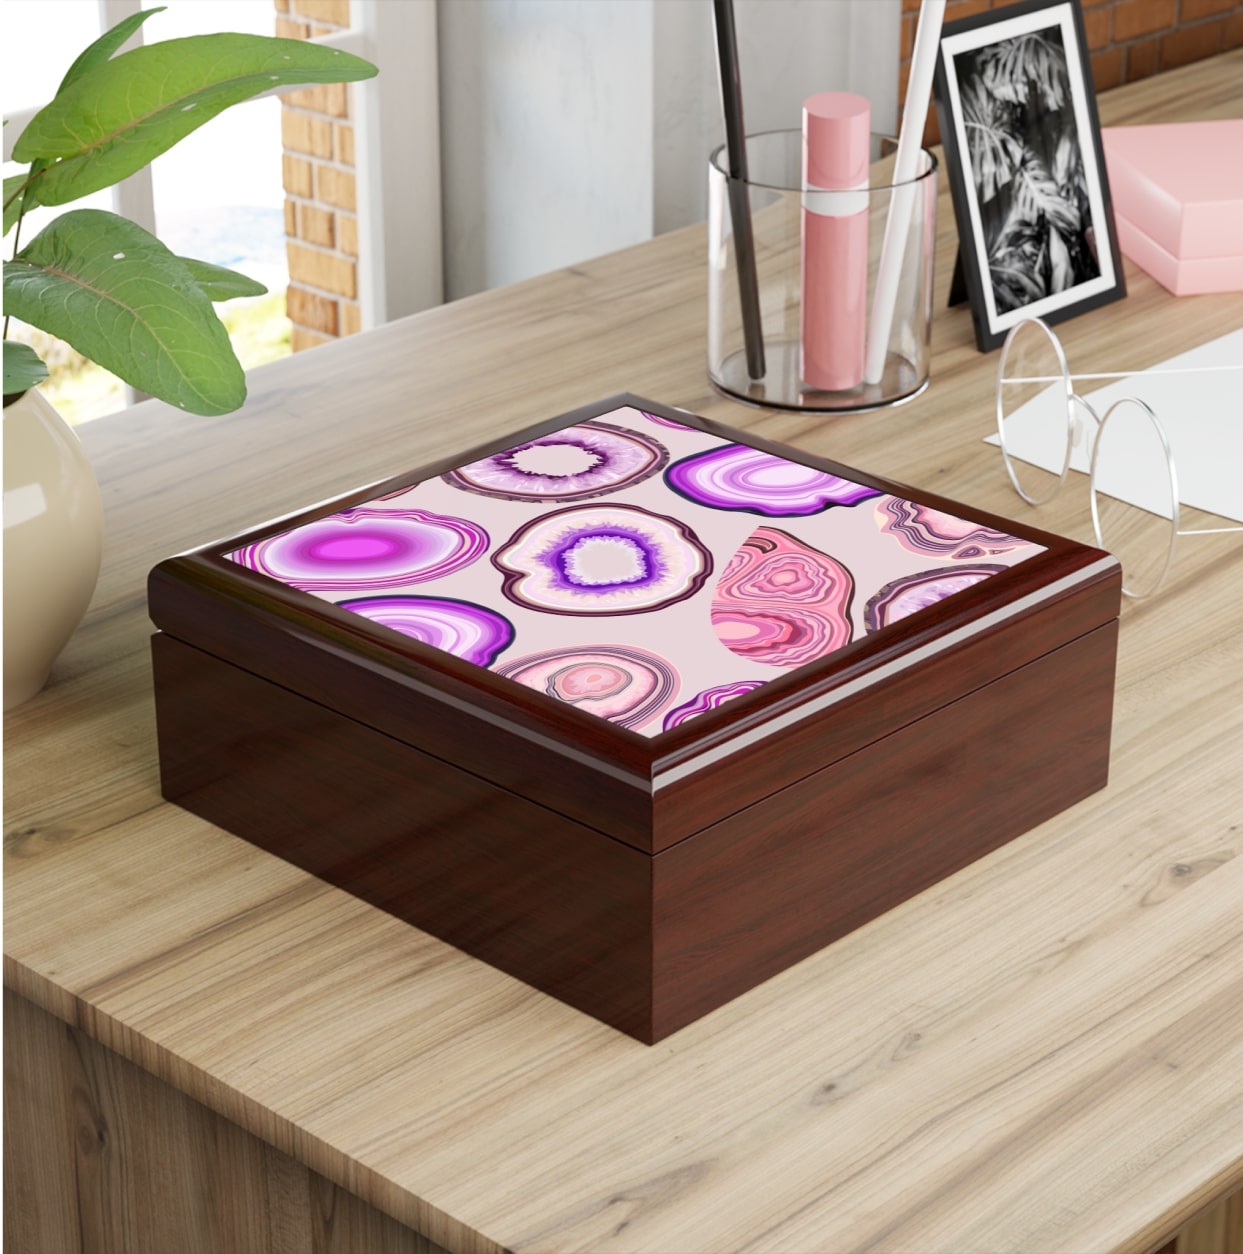 An image of a personalized jewelry box with abstract art on top.